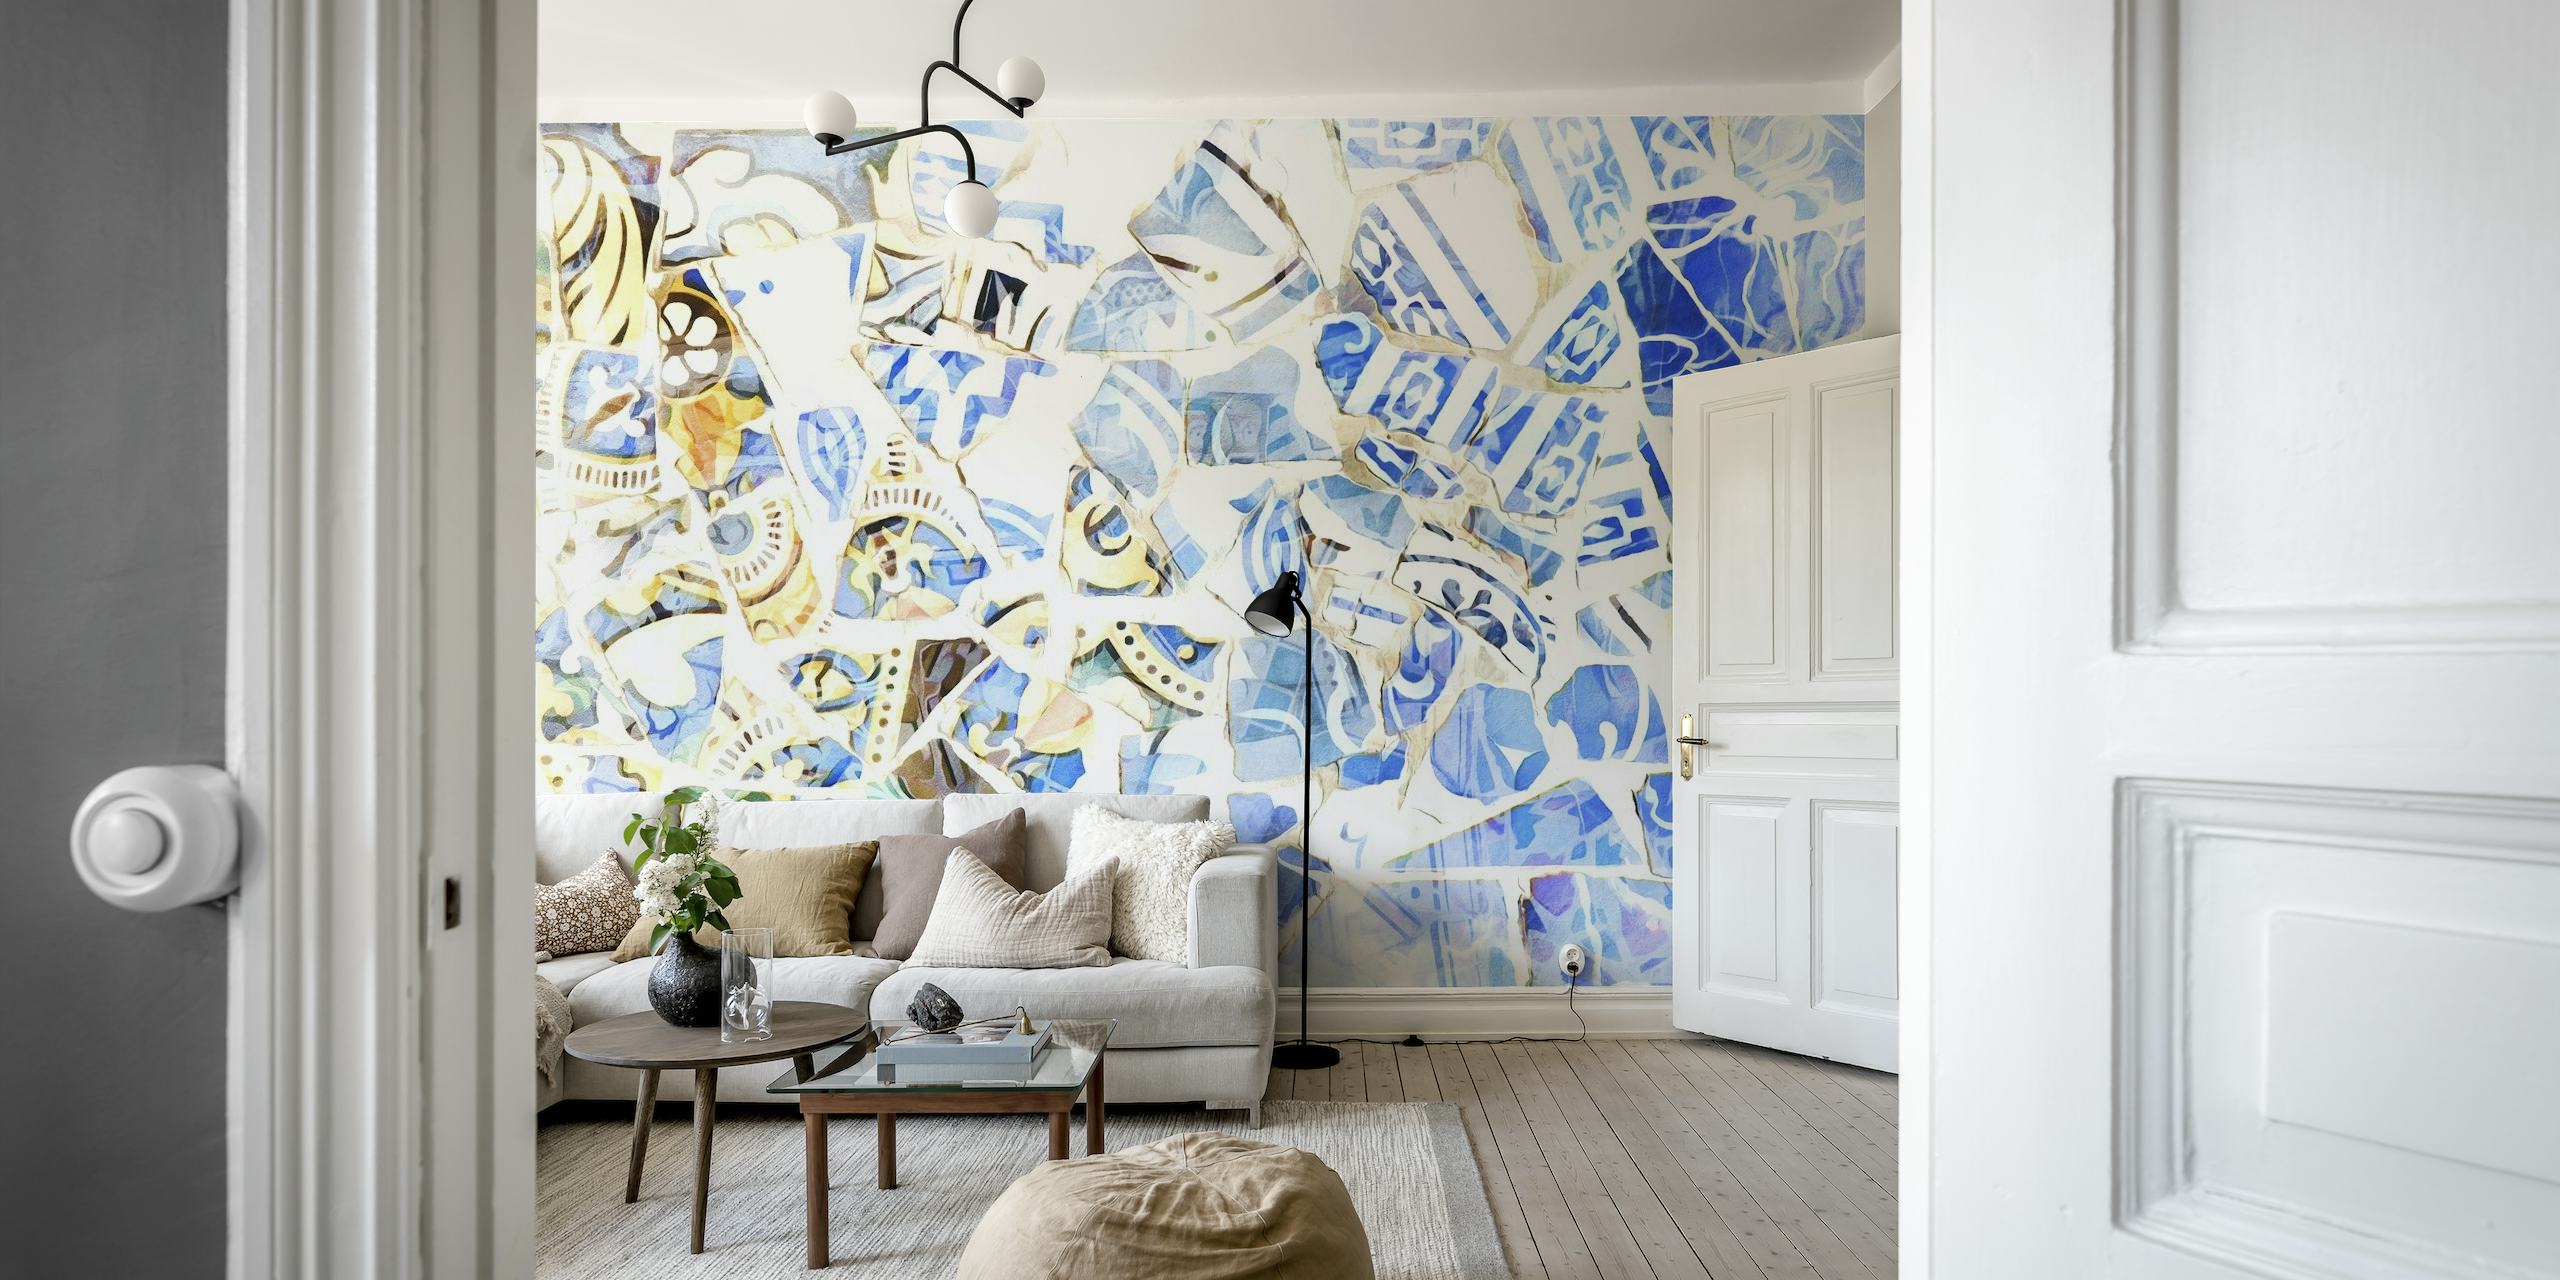 Abstract mosaic wall mural in shades of blue and white, inspired by Barcelona's art